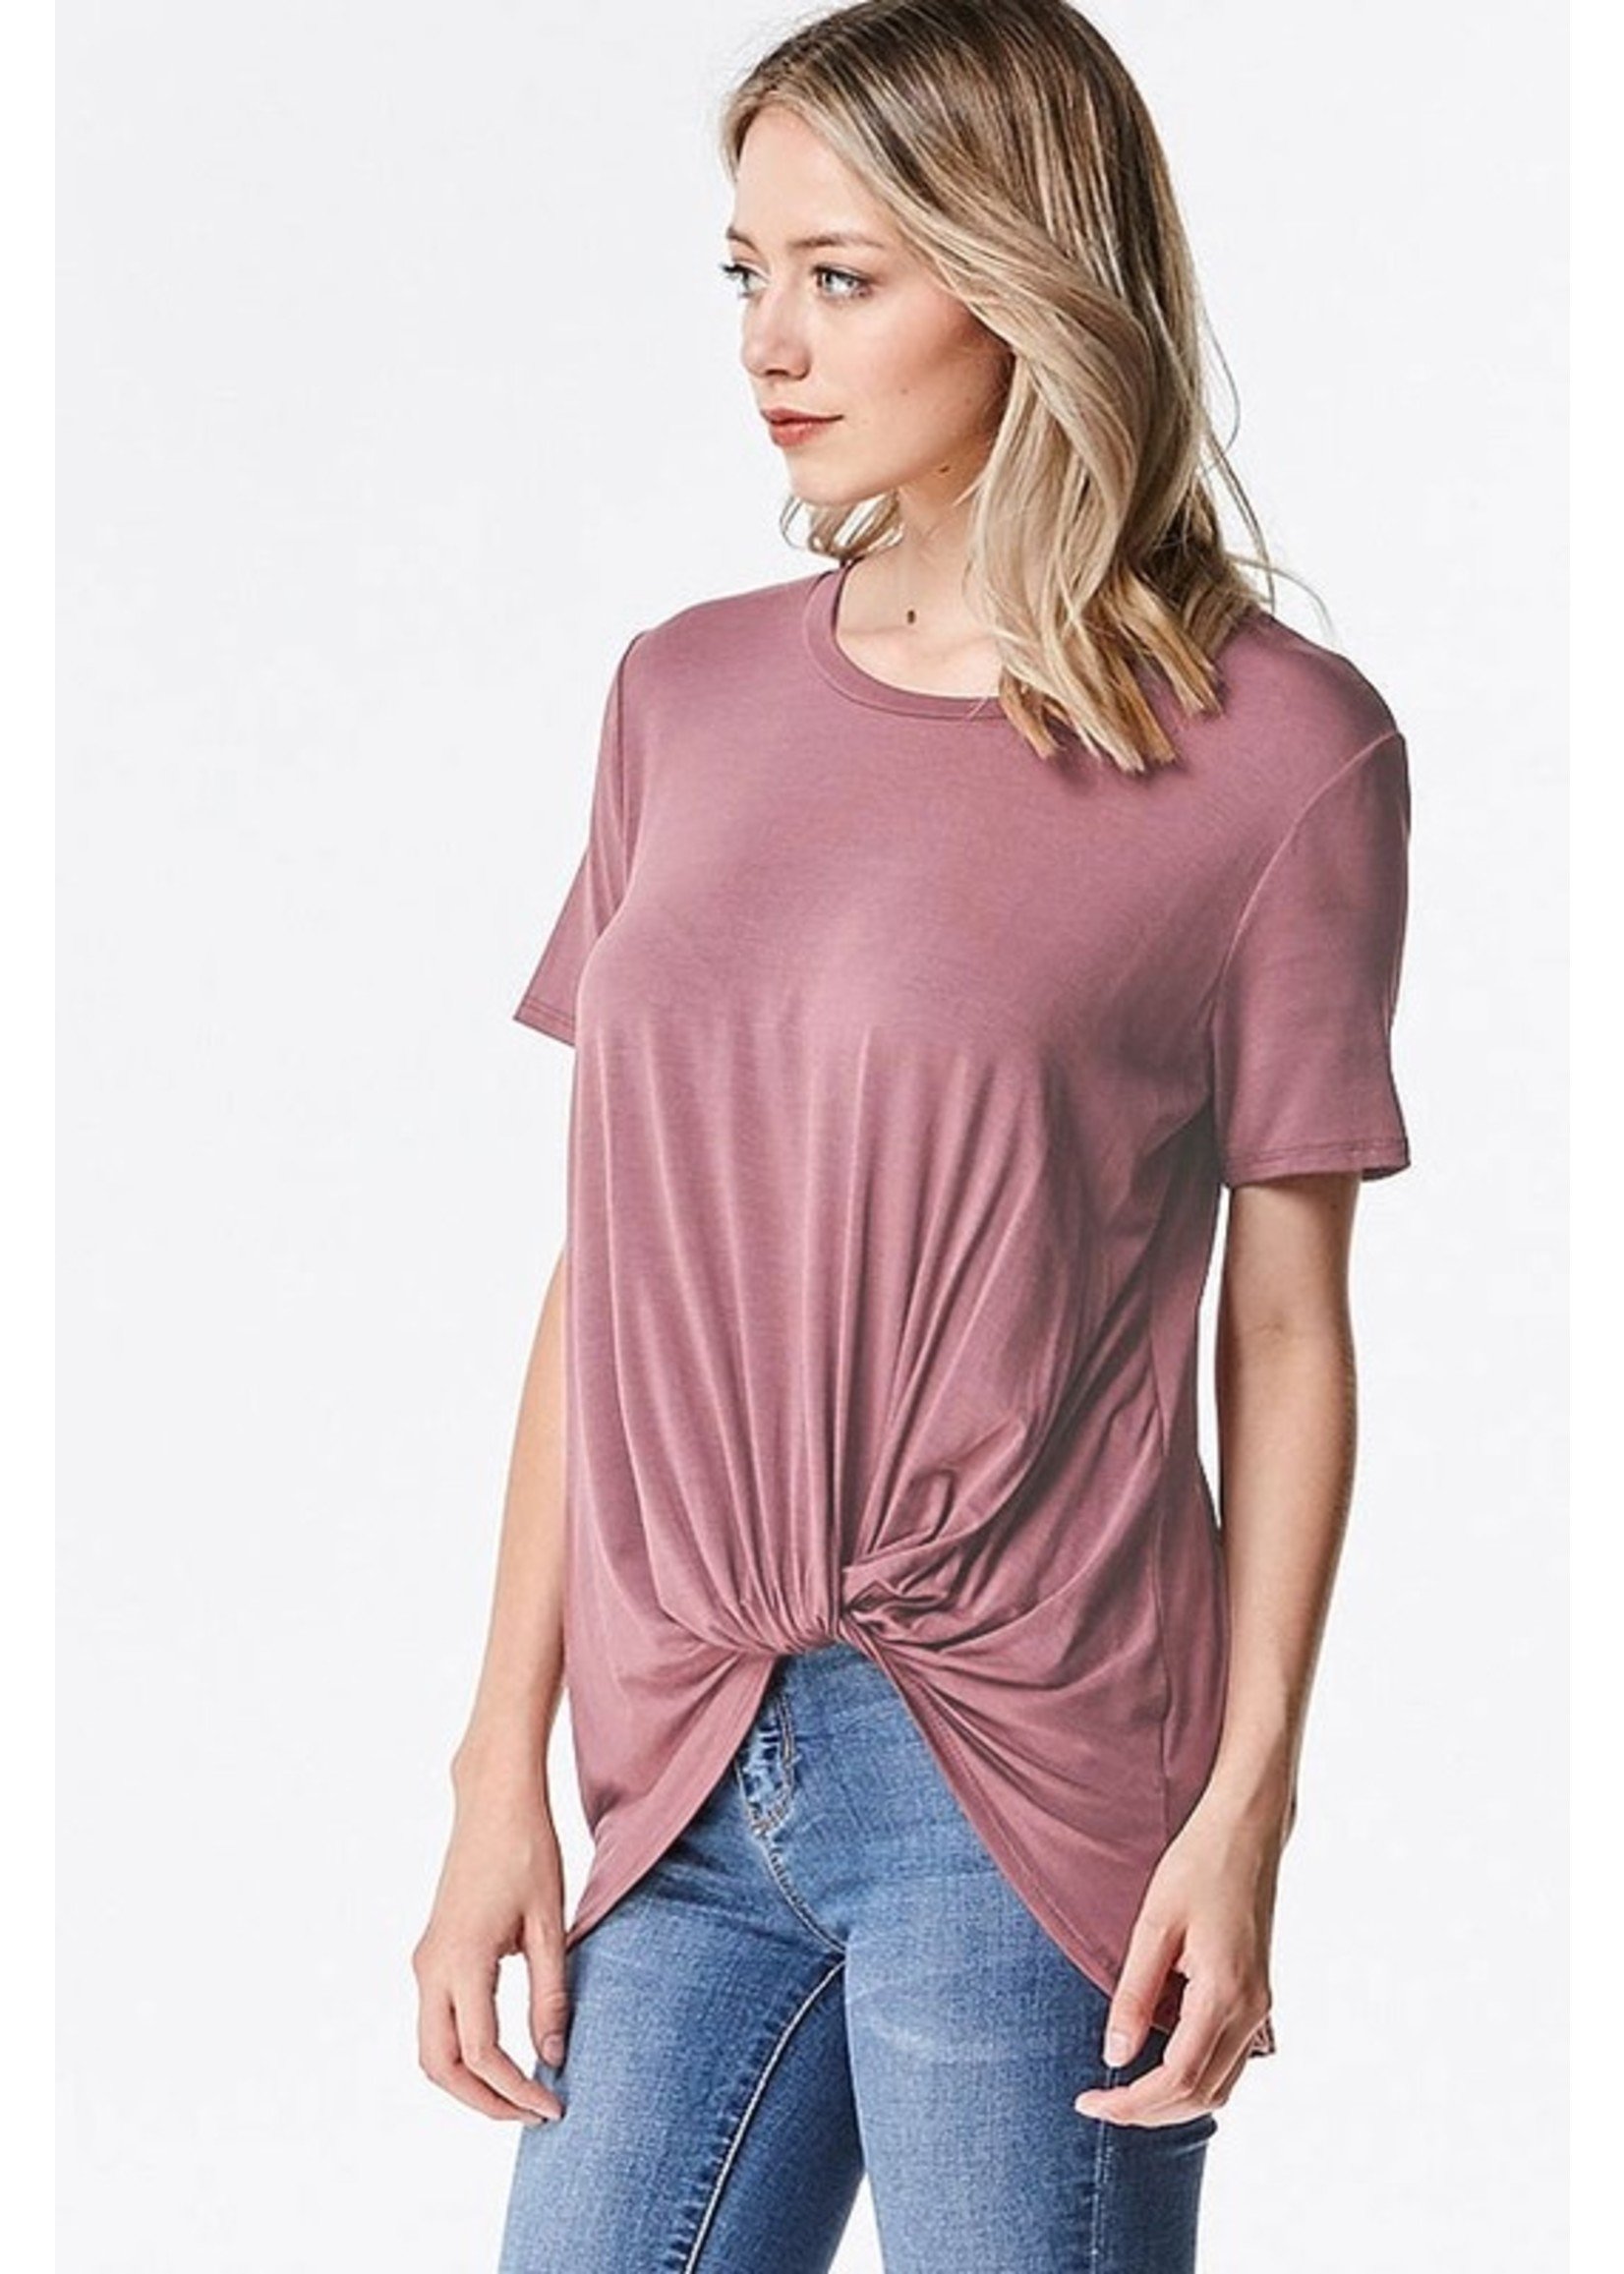 The Must Have Twisted Hem Tee